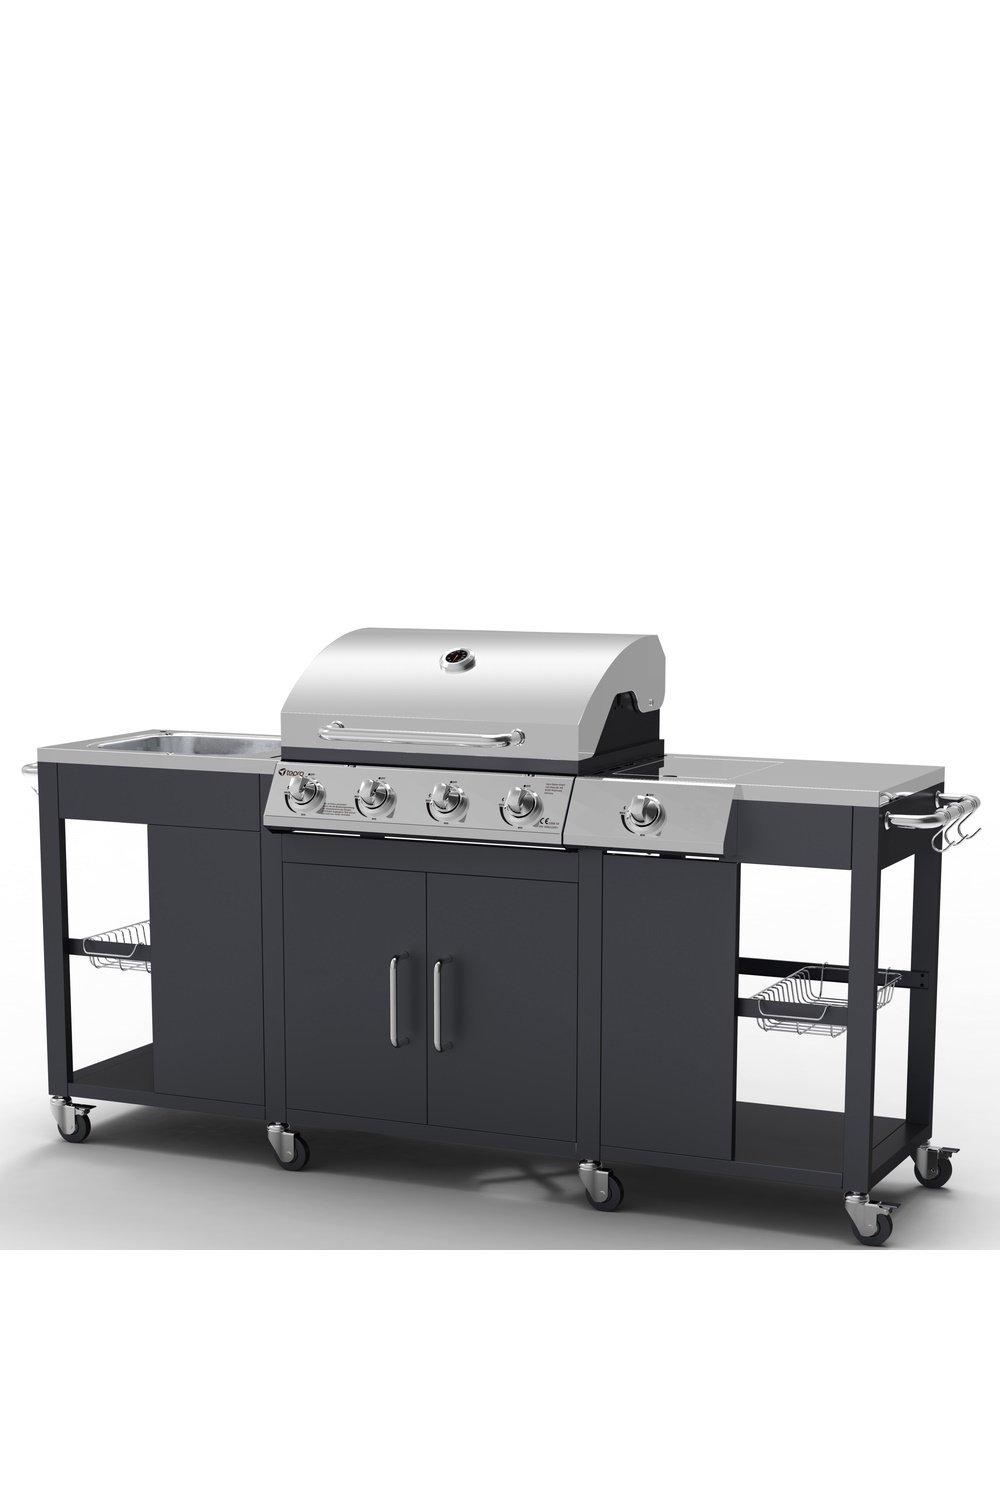 Petersburg Outdoor Kitchen with 4 Burner Gas Grill, Side Burner and Sink